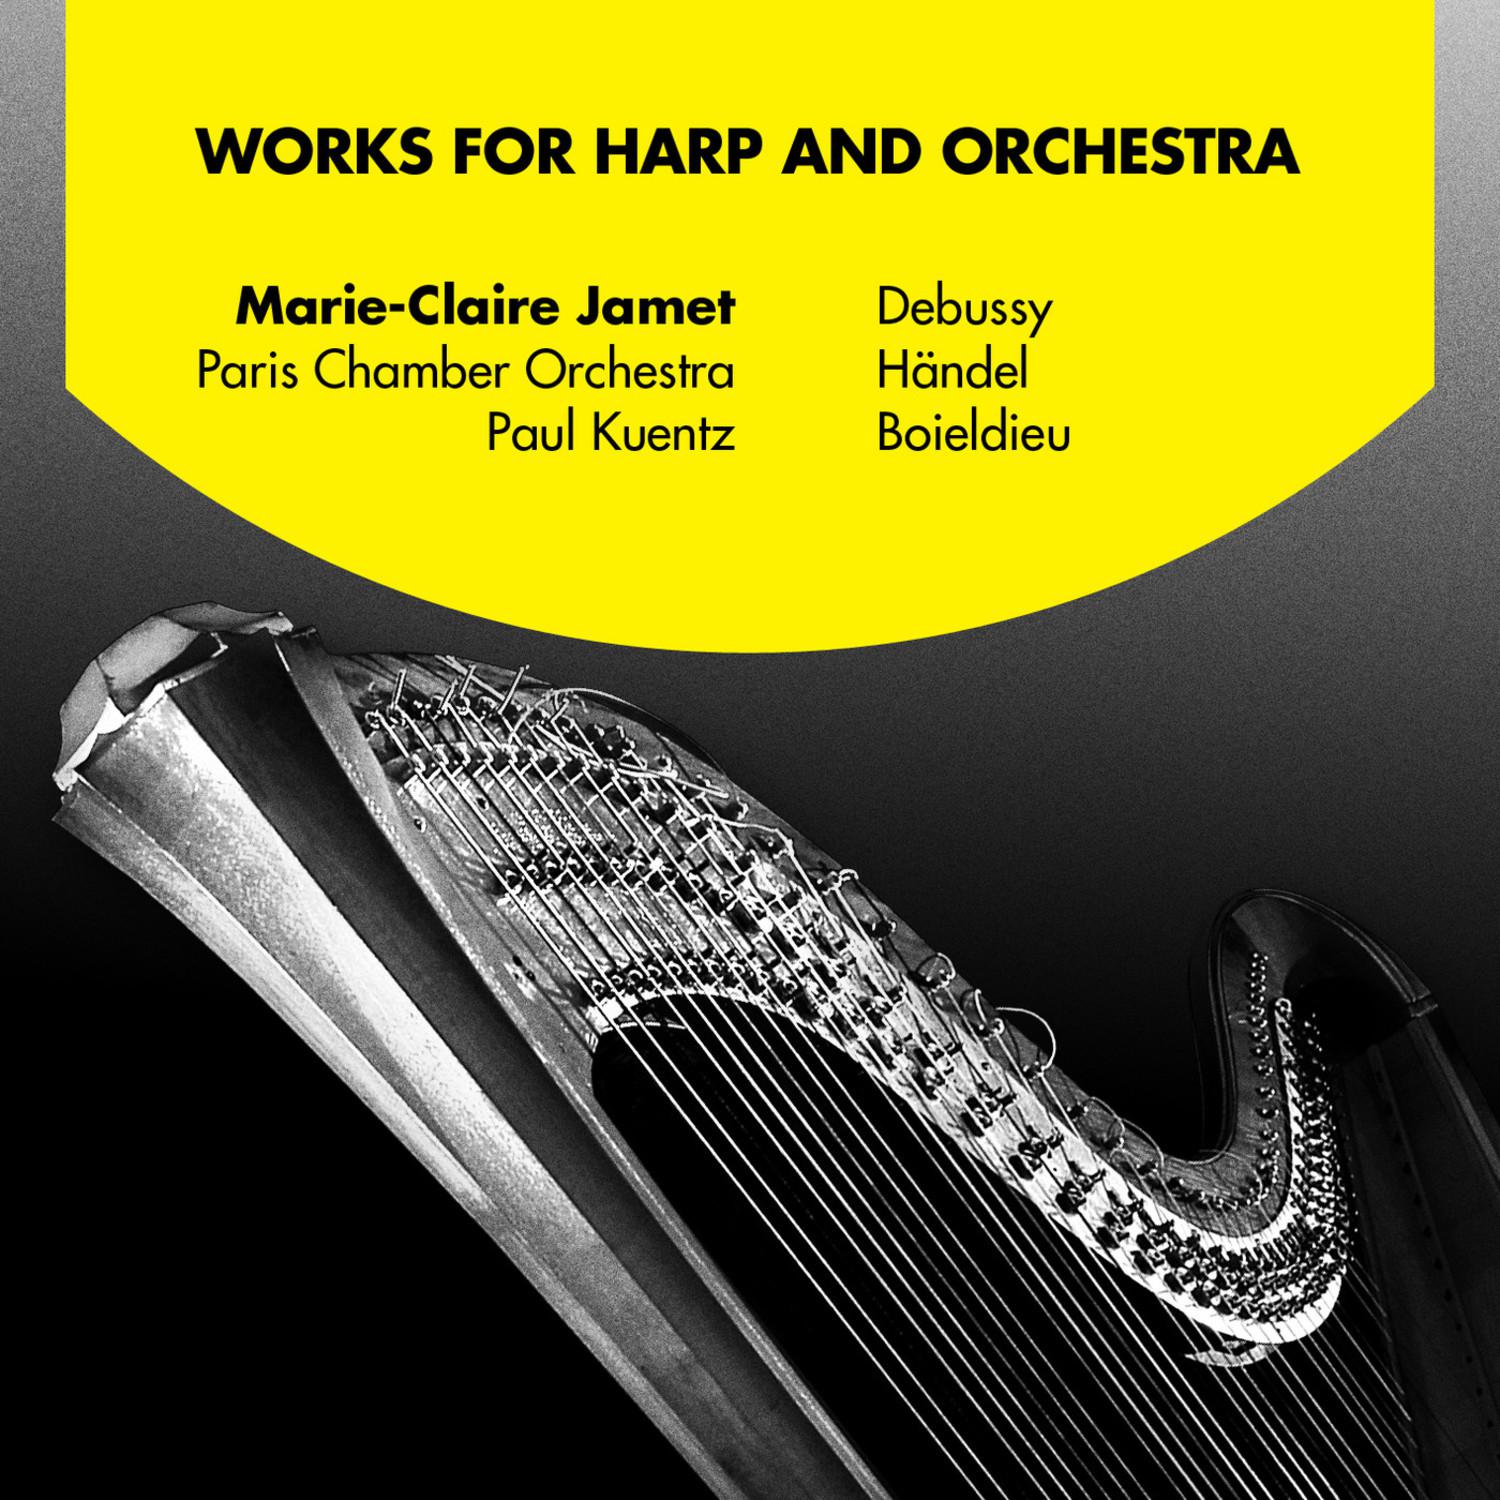 Concerto in B-Flat Major for Harp and Strings, HWV 294: II. Larghetto